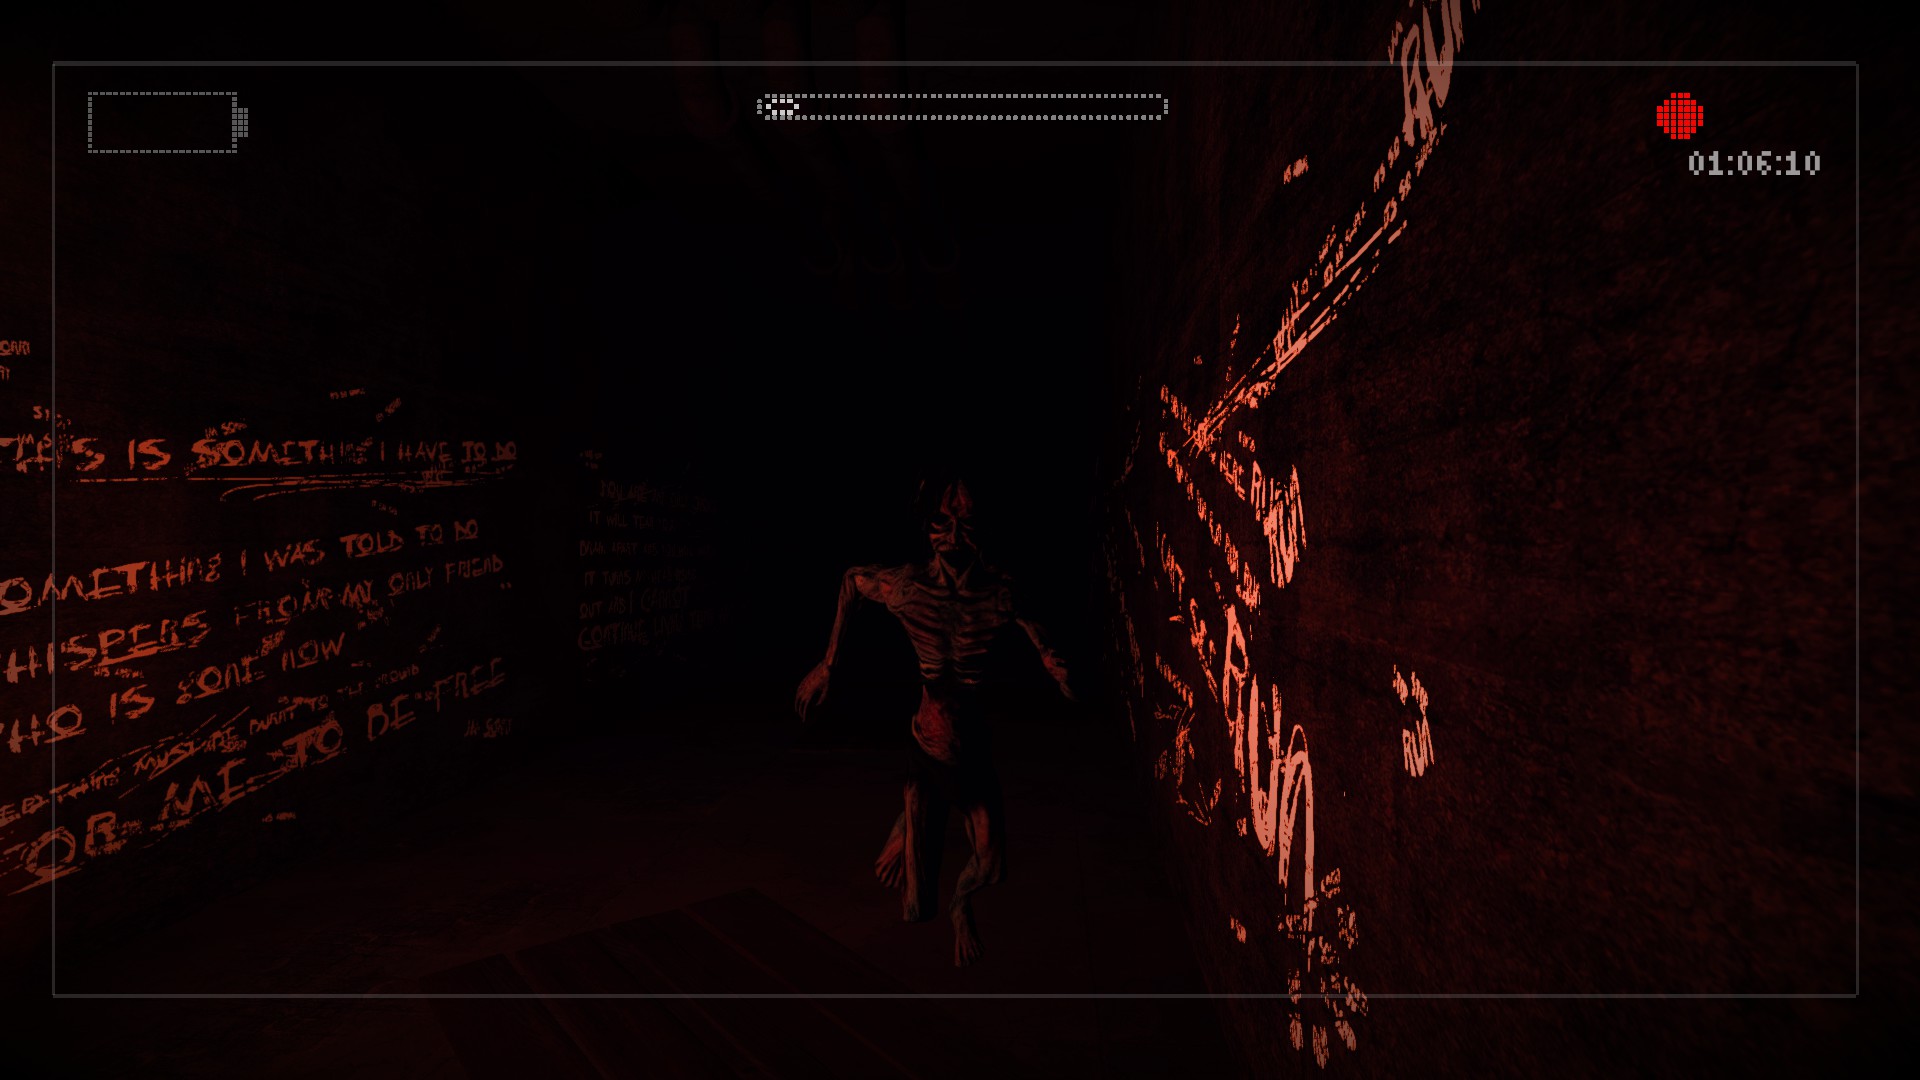 download free slender the arrival steam